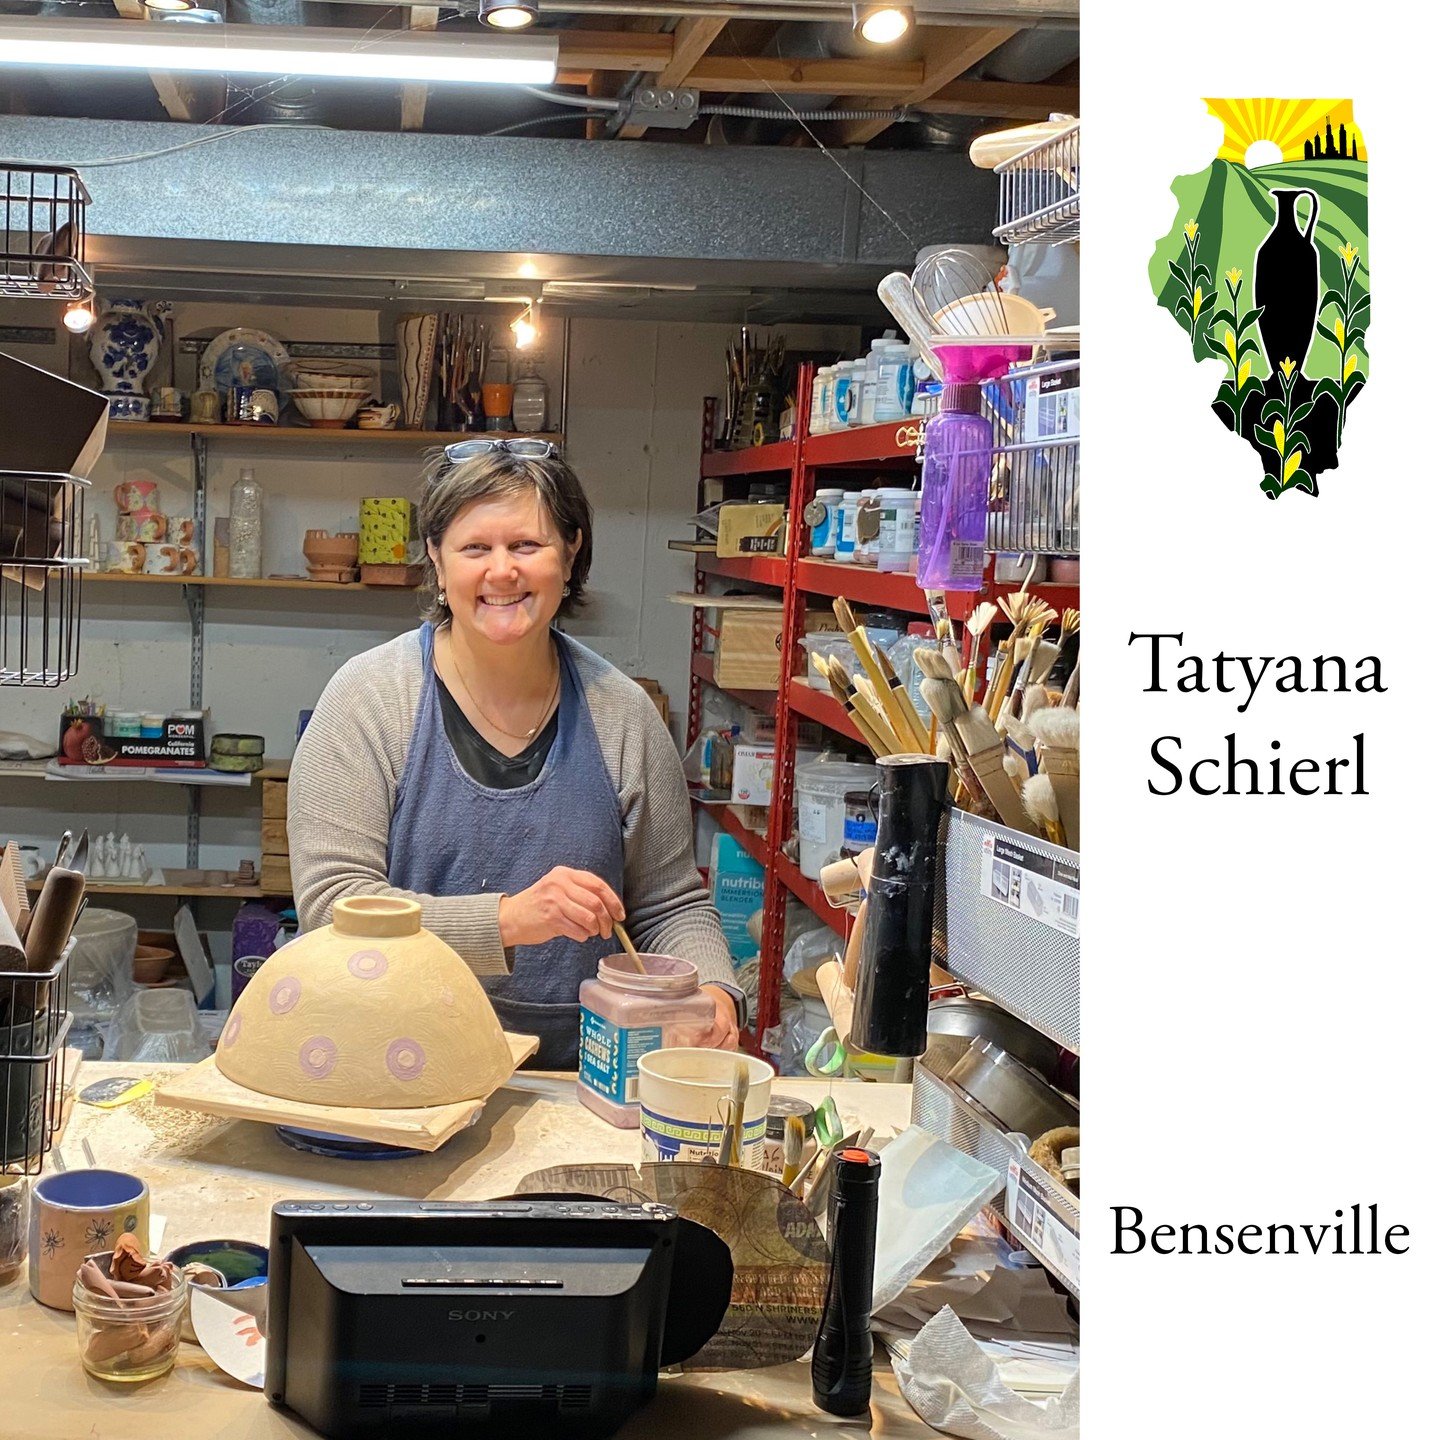 The next guest we want to introduce you to is Tatyana Schierl. This is also Tatyana&rsquo;s first year on the northern Illinois Pottery tour!

Tatyana Schierl grew up in Moscow, Russia. Once in America, she attended Macalester College where she fell 